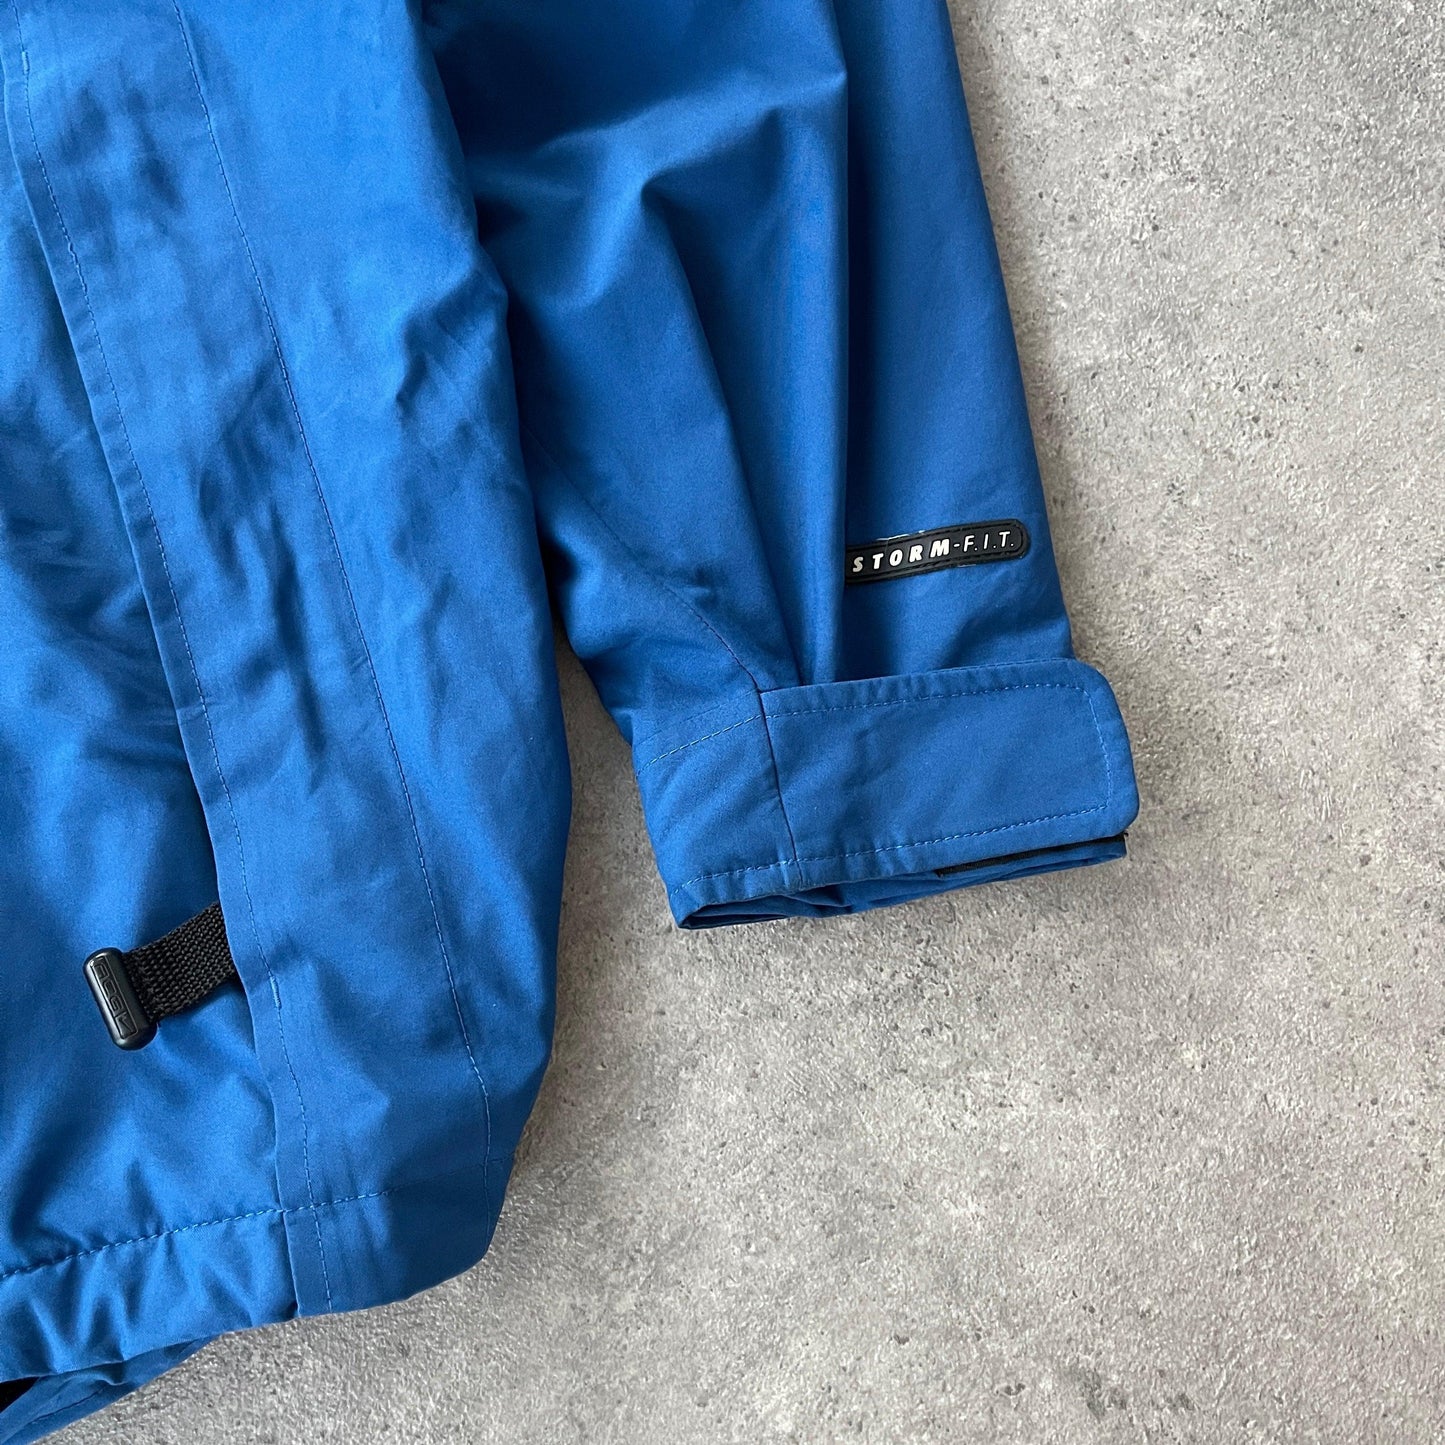 Nike ACG 1990s storm fit heavyweight technical jacket (S) - Known Source